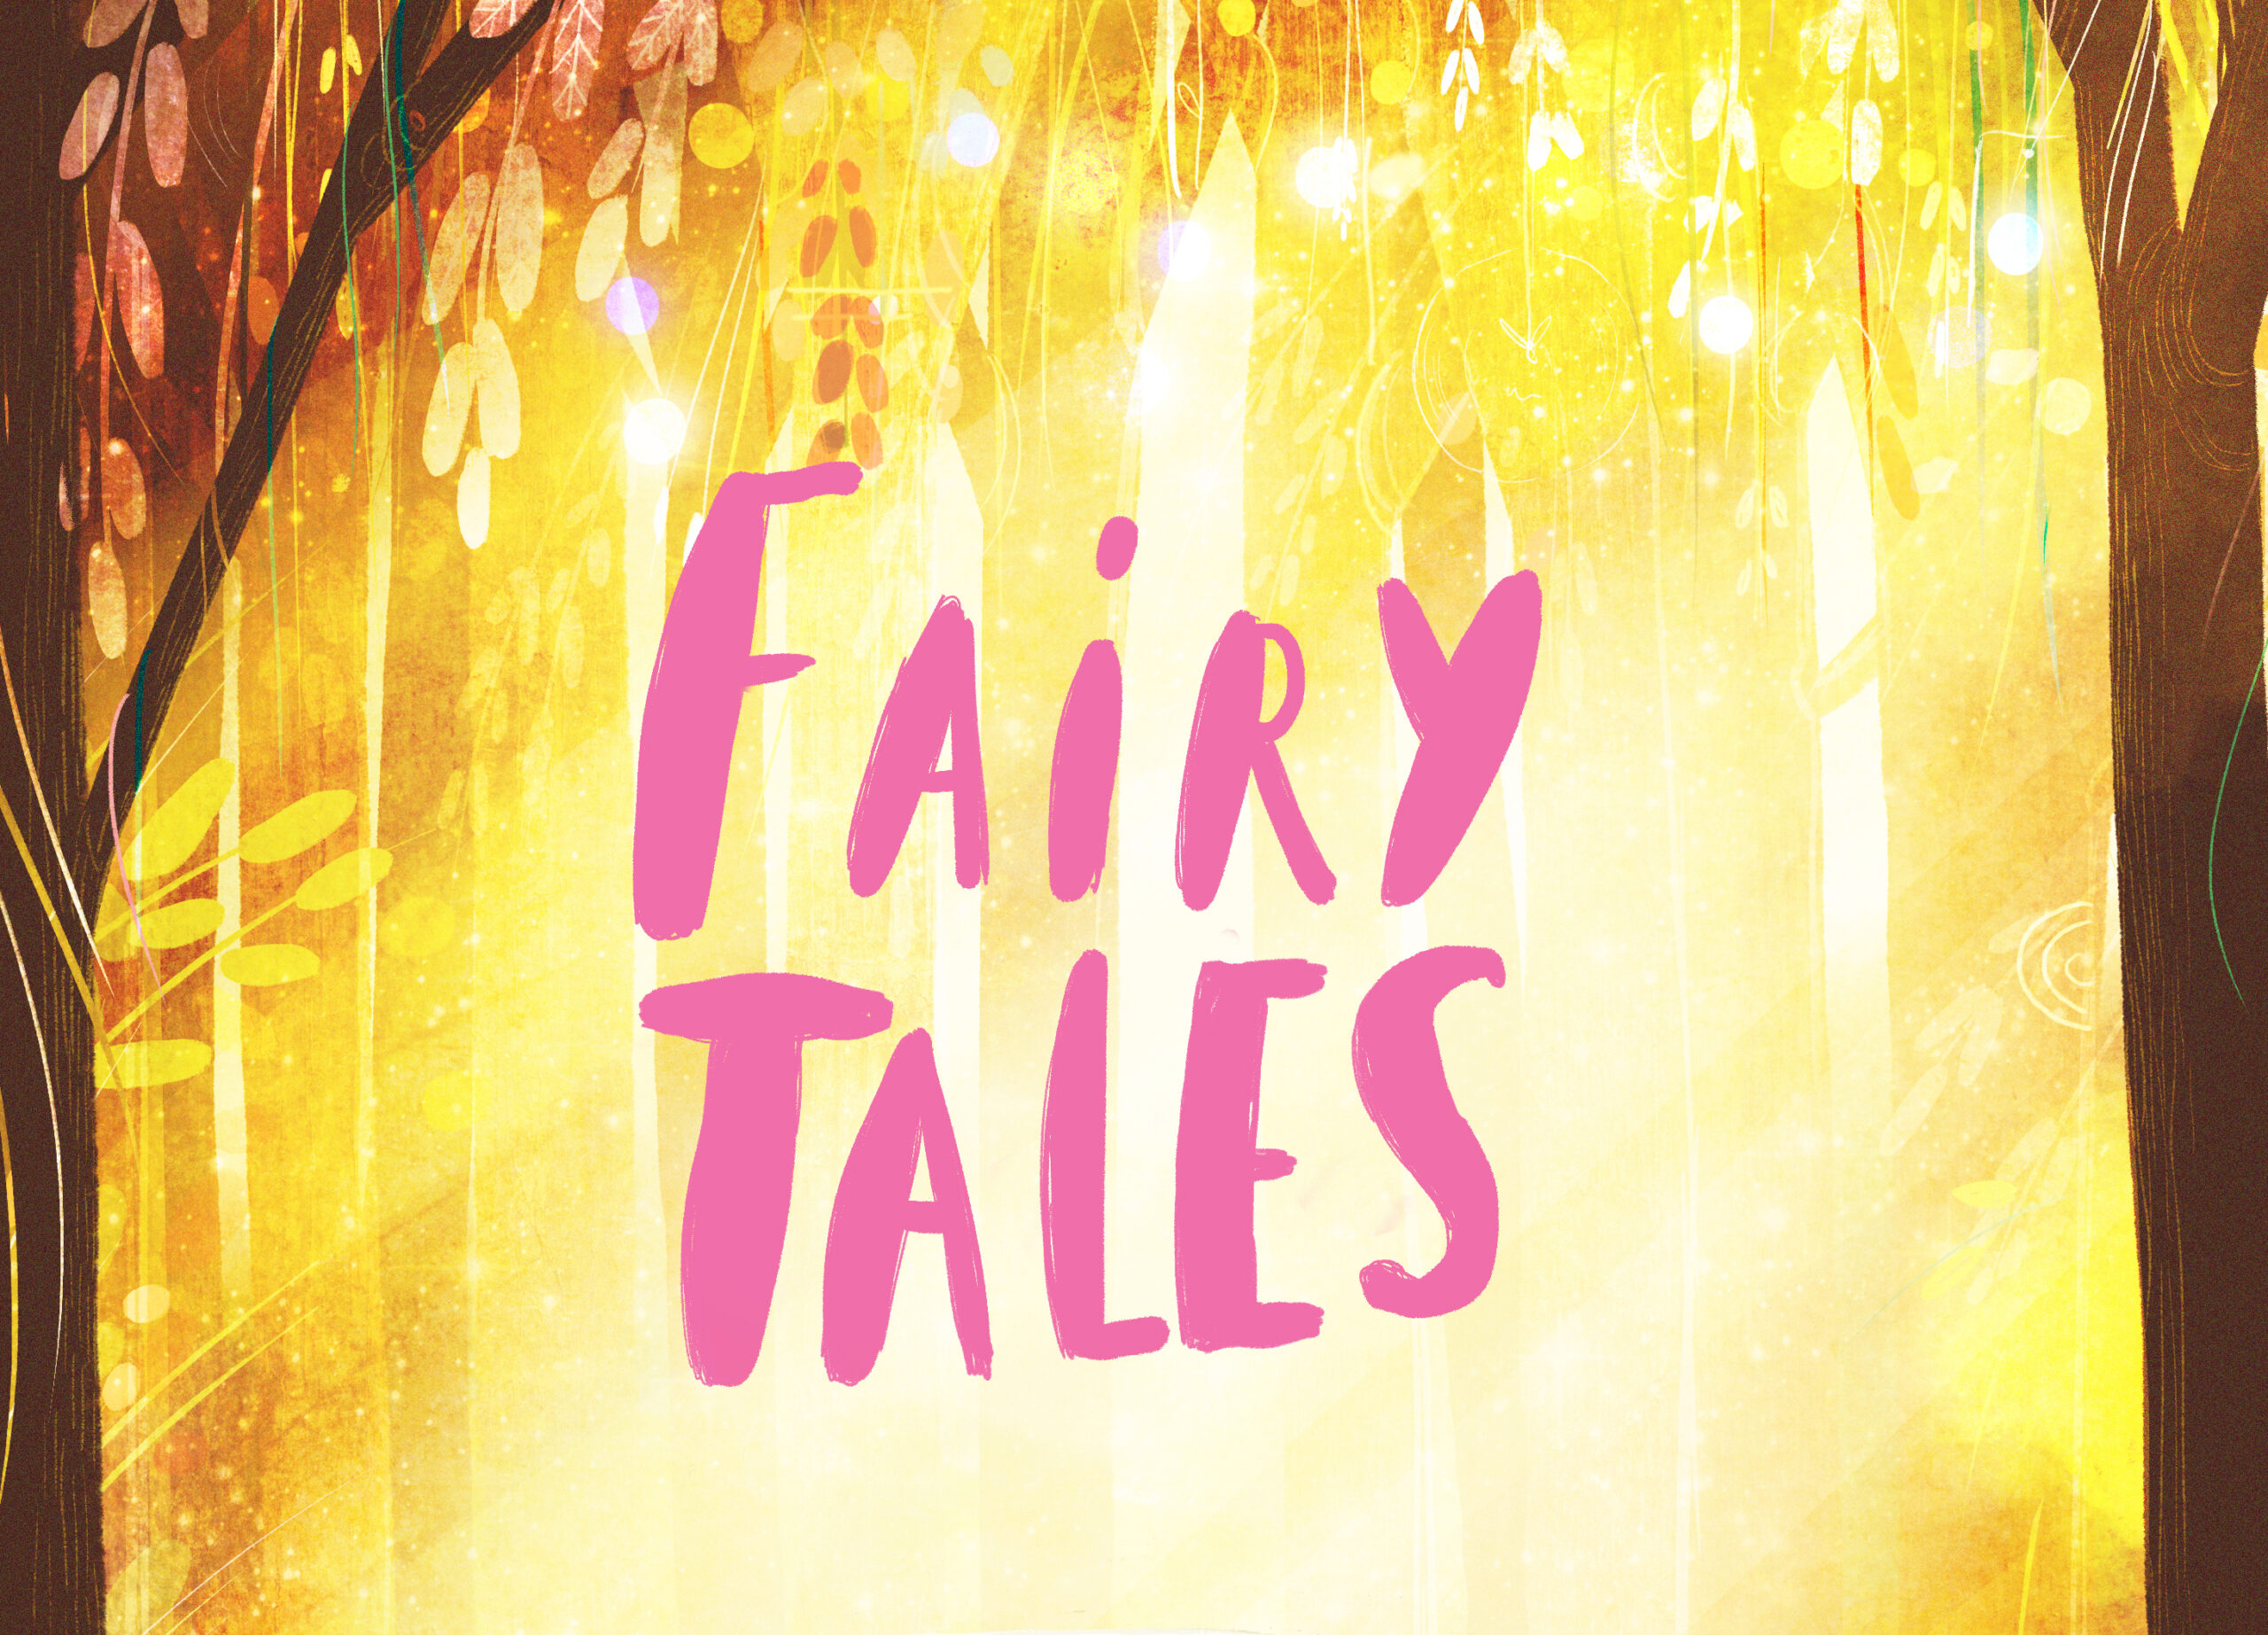 Fairy Tales is Z-arts latest exhibition, an interactive world of play and storytelling for children up to 8-years old and their grown-ups.